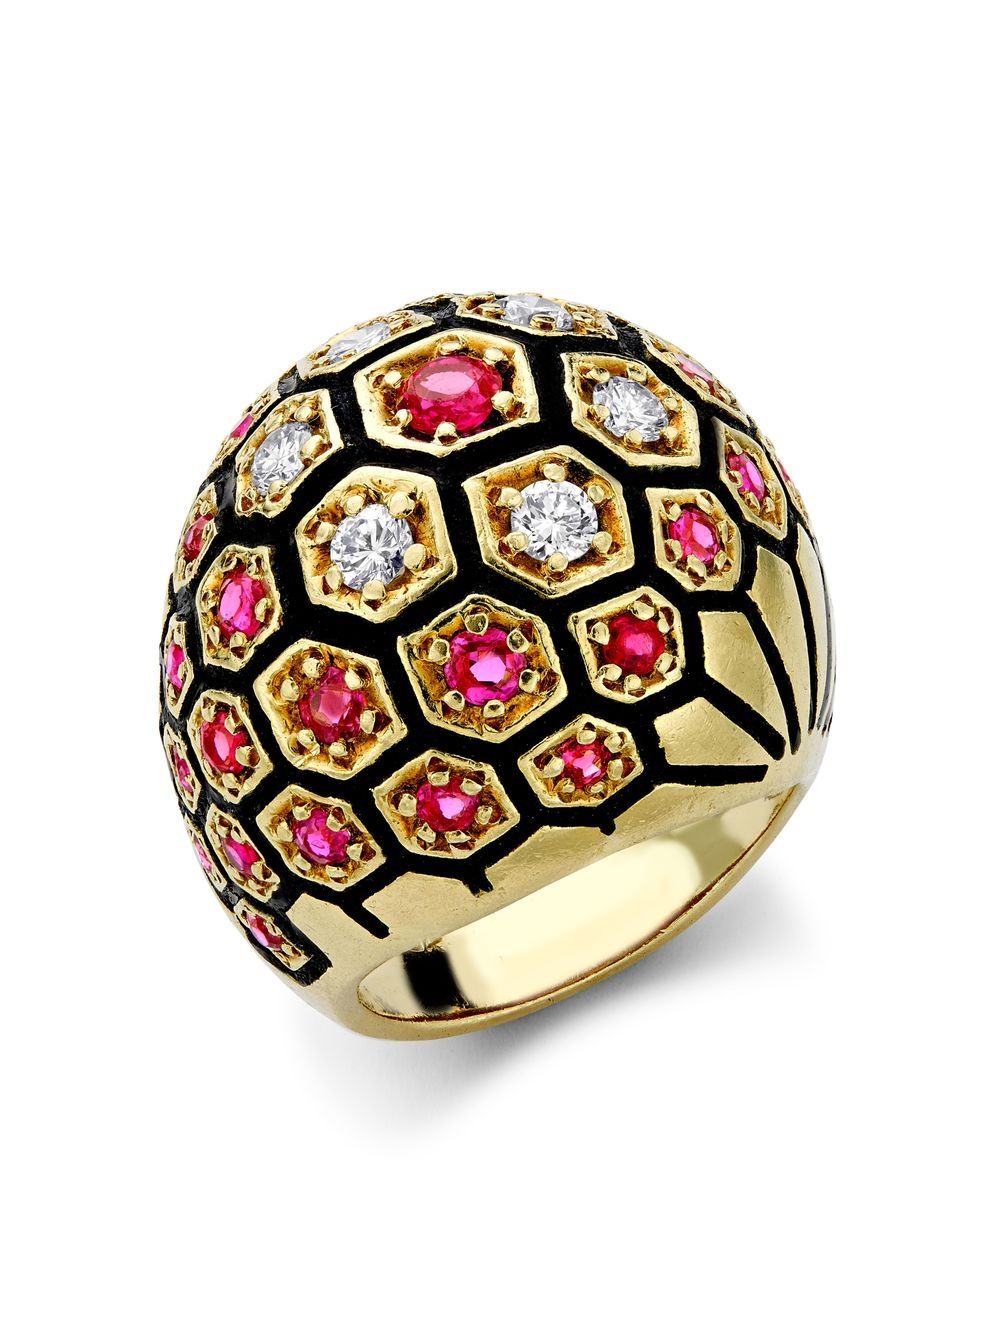 Pre-owned Pragnell Vintage 1970s 18kt Yellow Gold Retro Diamond And Ruby Honeycomb Dress Ring